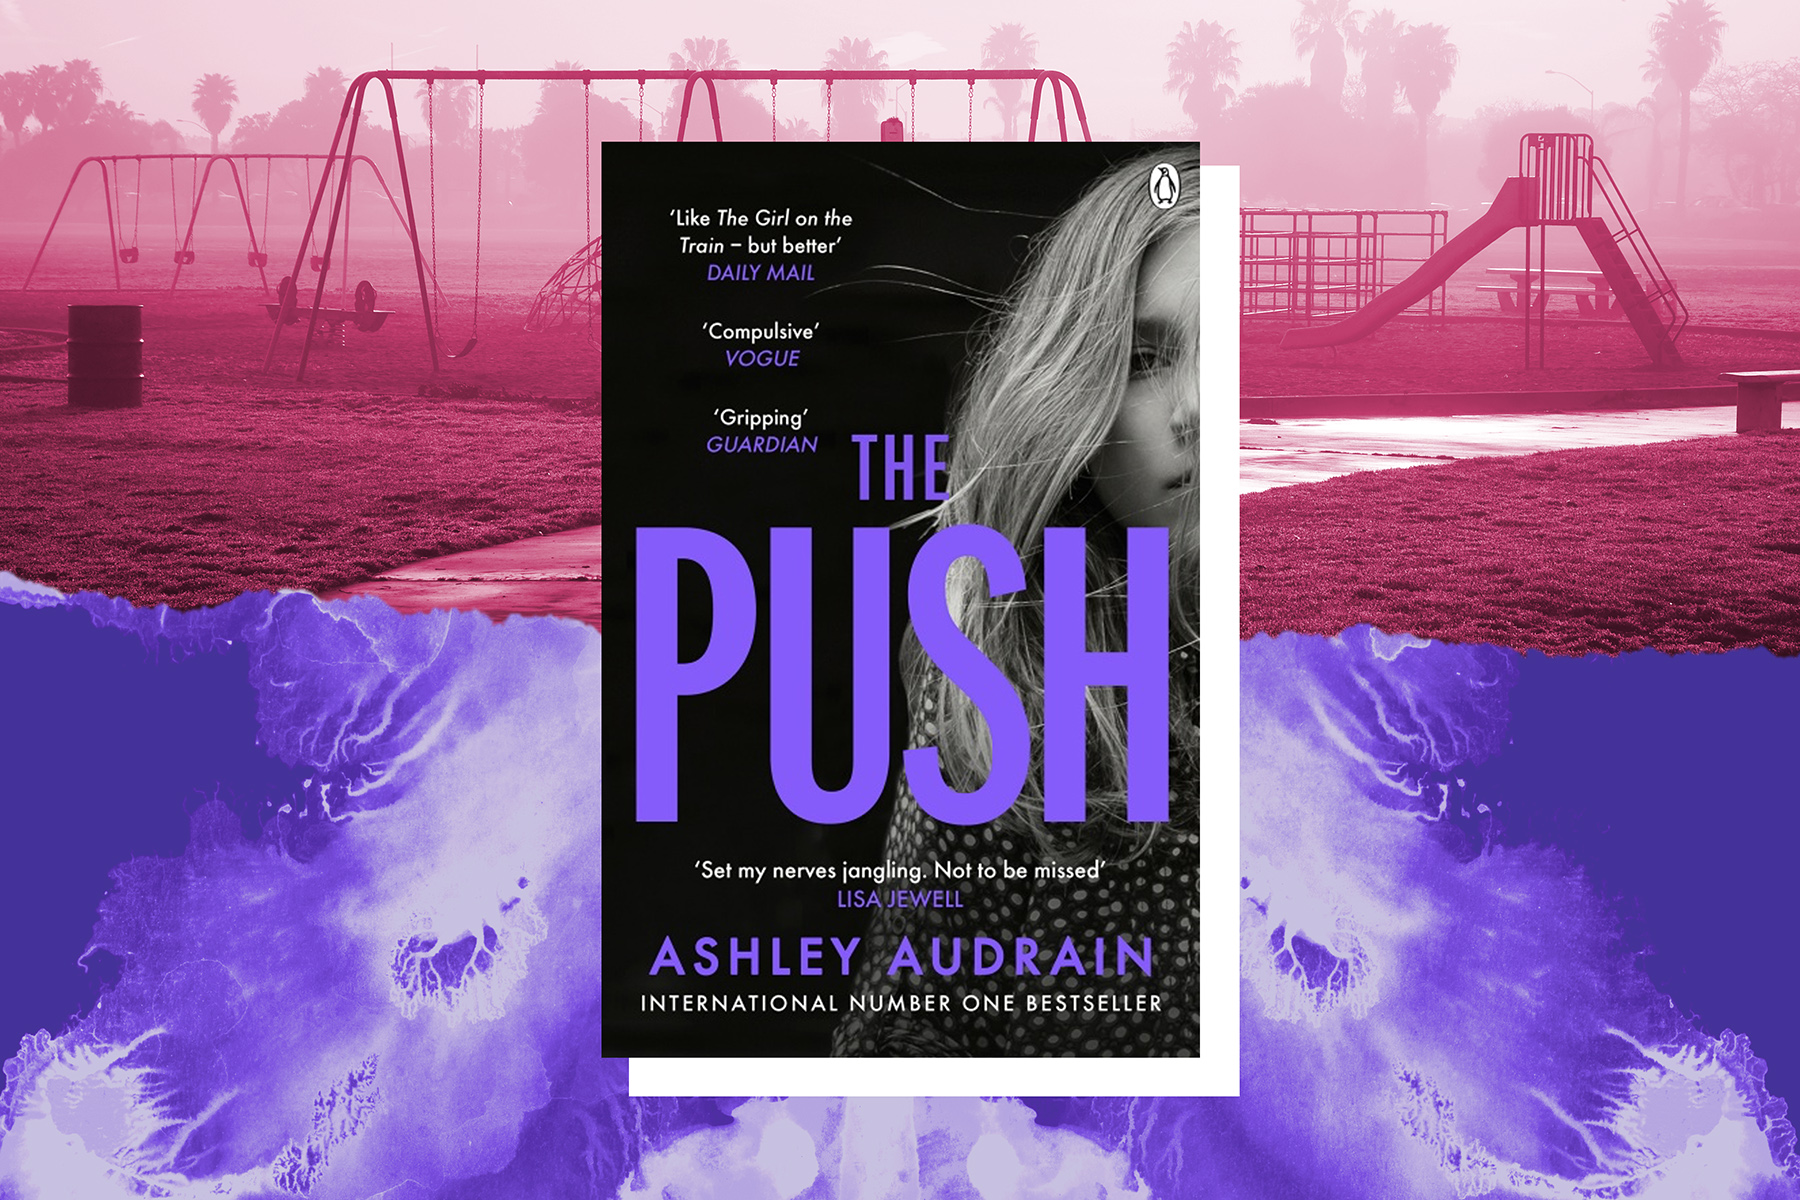 The cover of The Push against a collaged background of purple clouds and a pink swingset